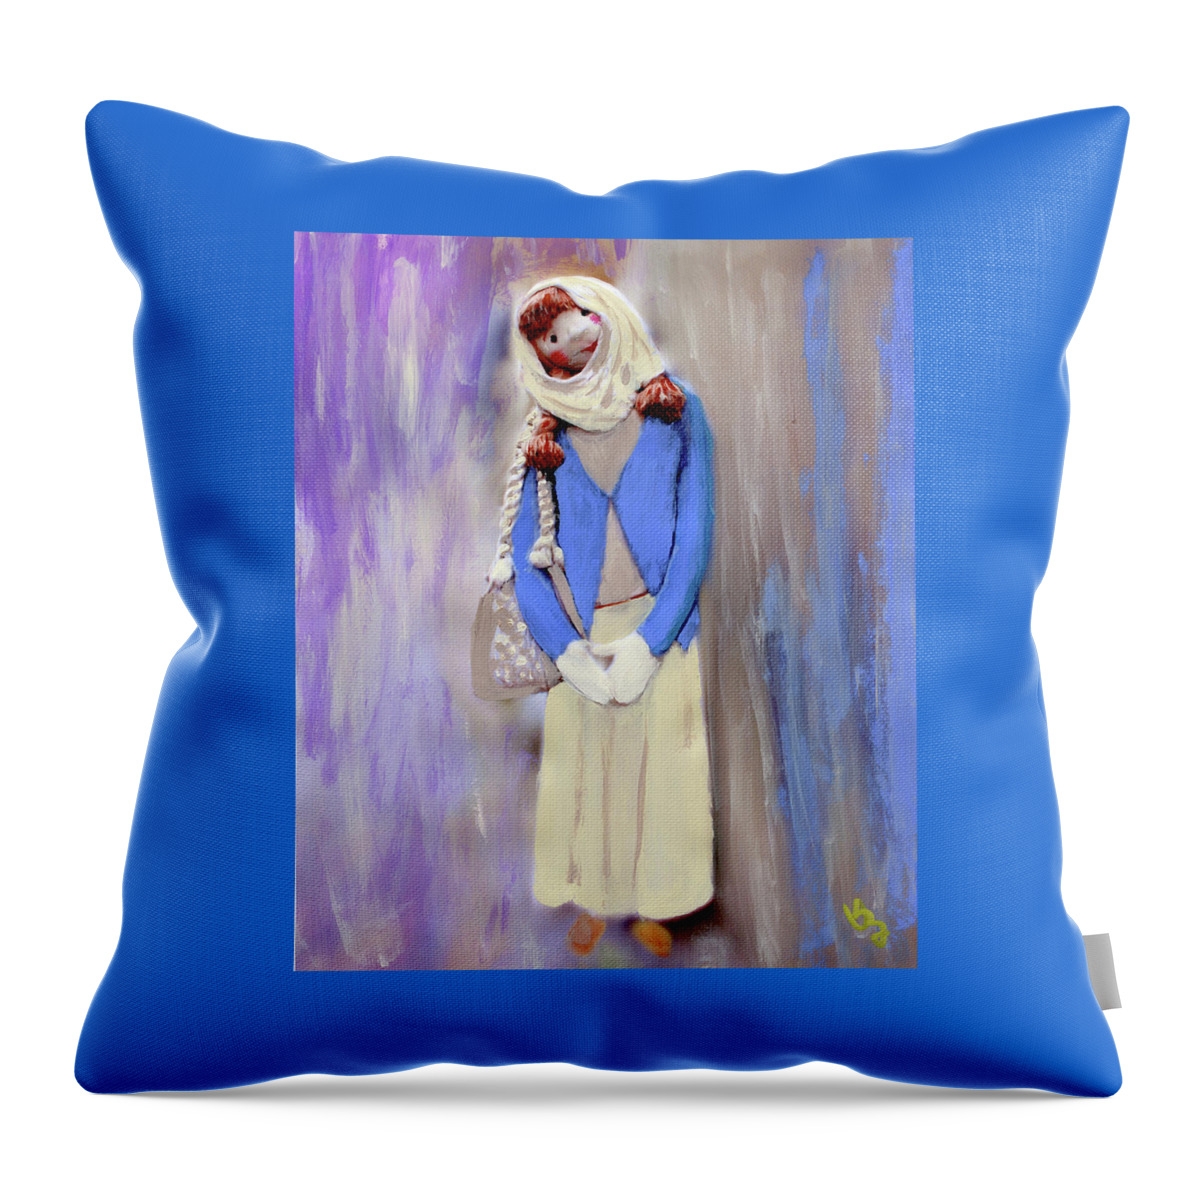 Buba Throw Pillow featuring the painting My Bubba by Deborah Boyd